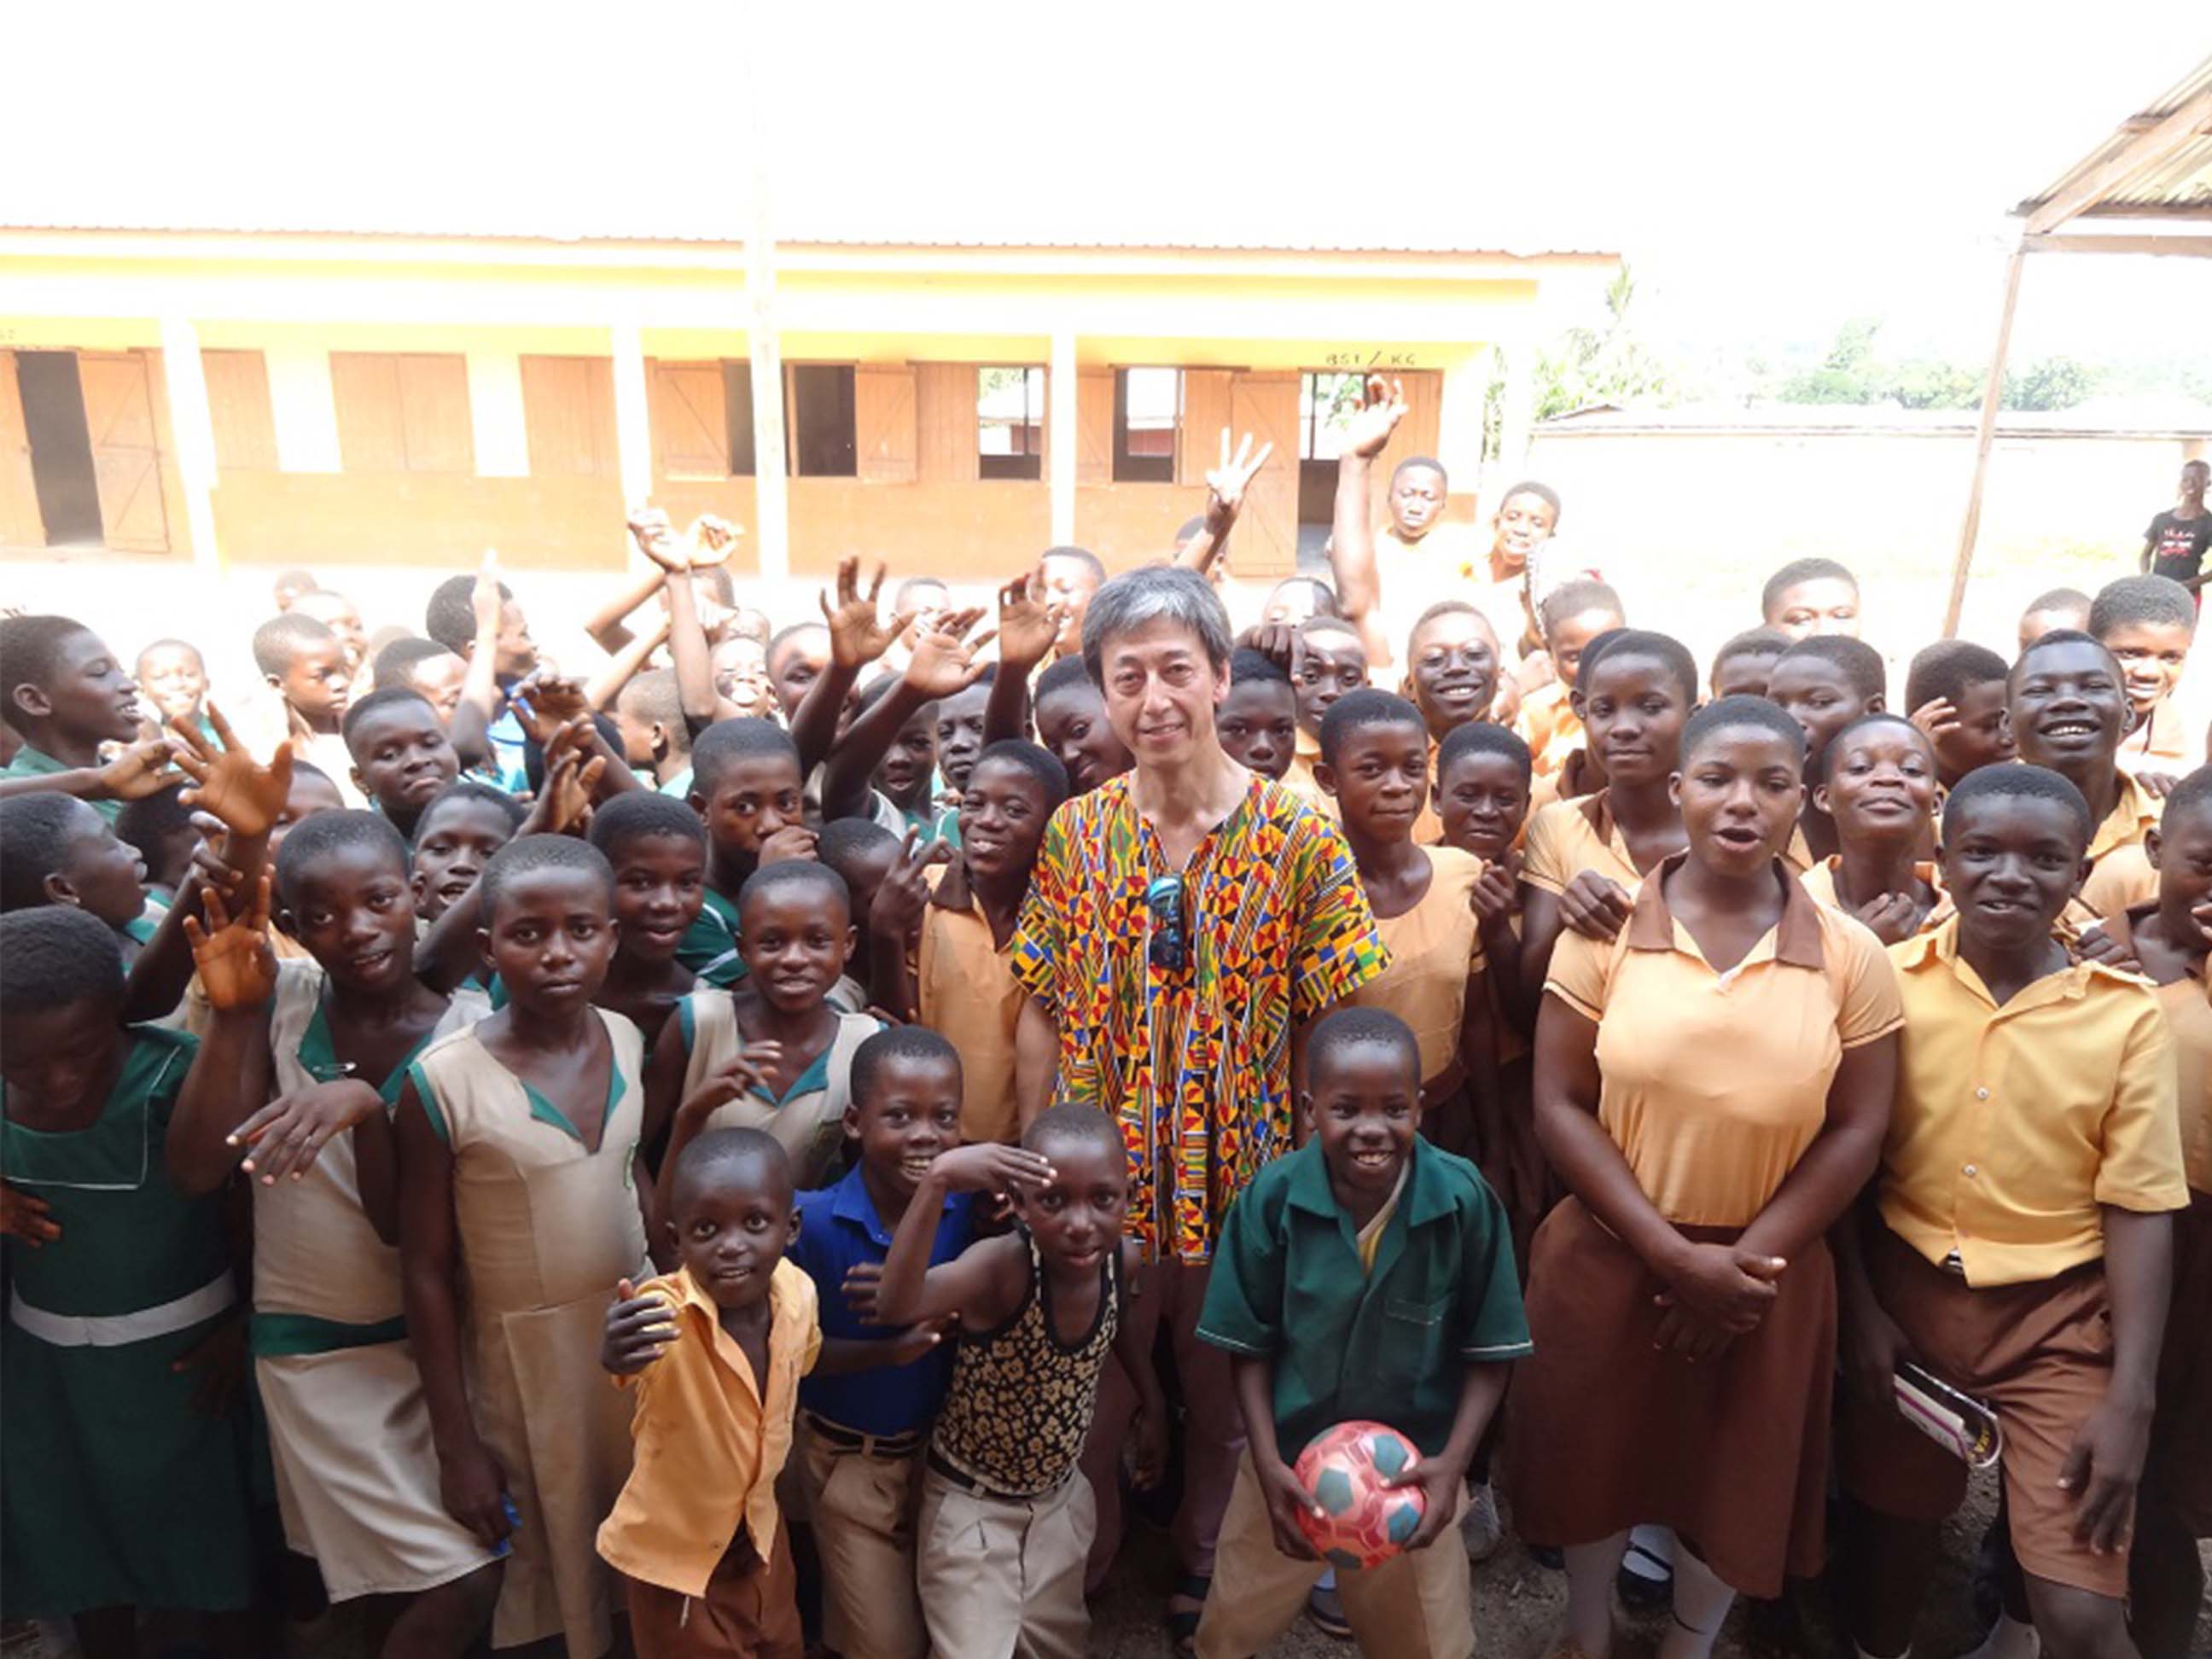 Photo: Meiji Cocoa Support includes education programs for the children